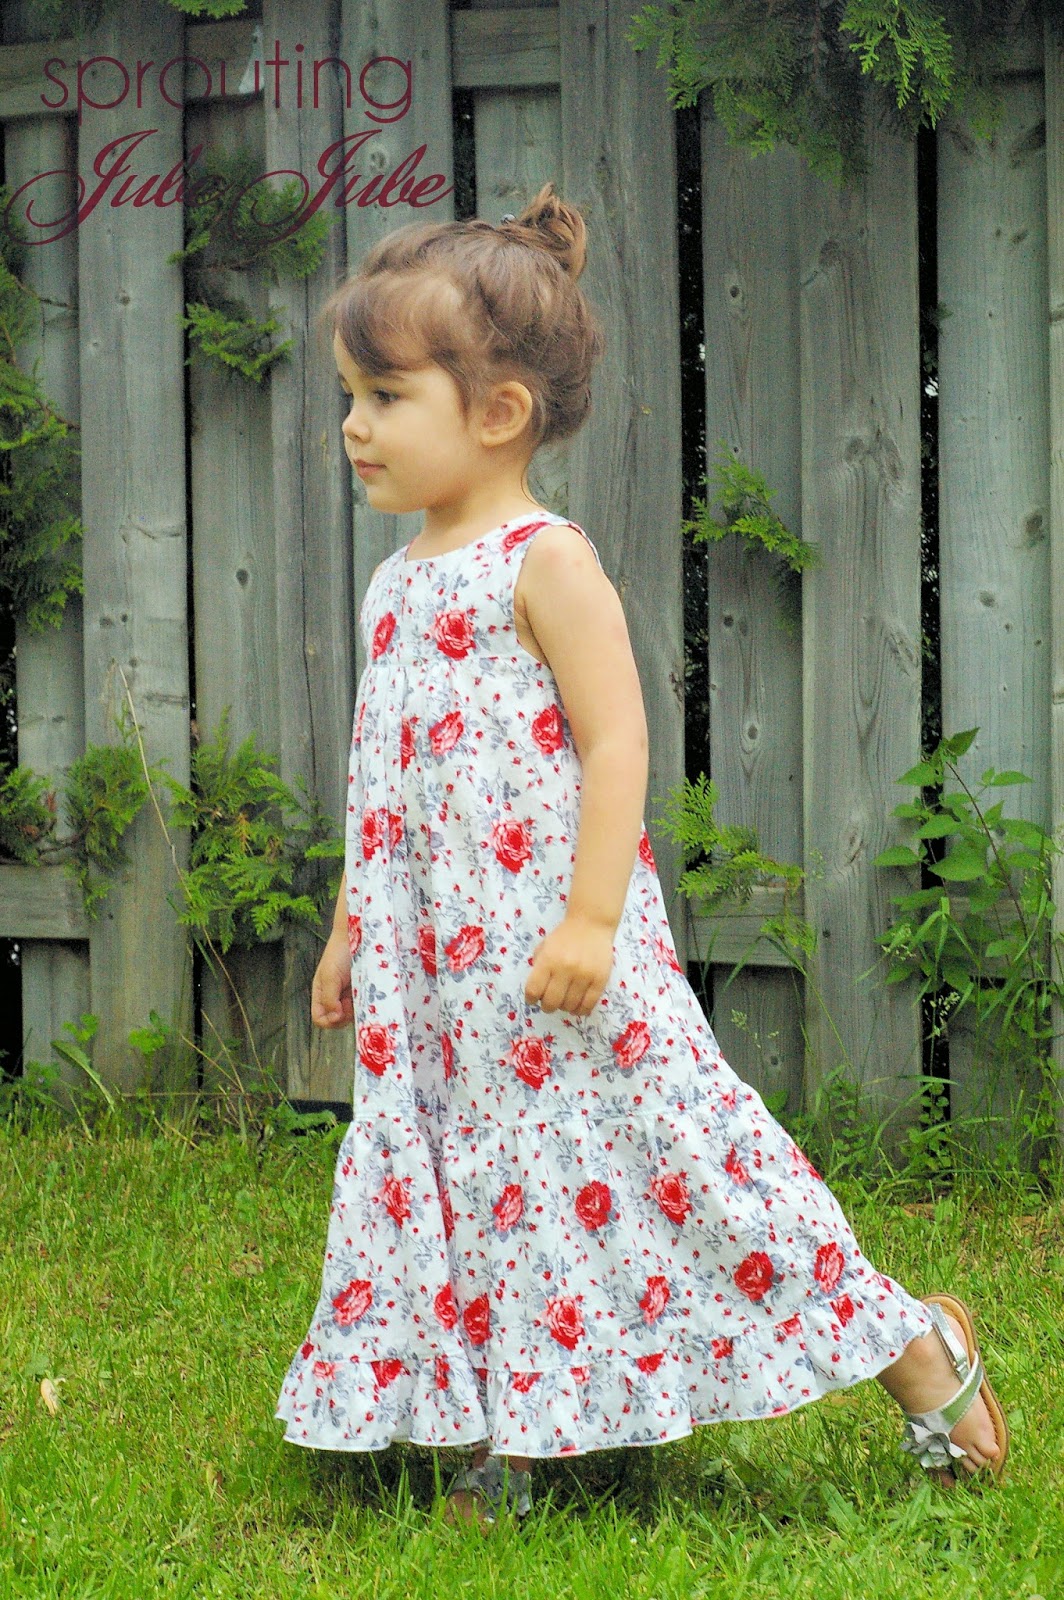 Sprouting JubeJube: Sweet Jane a Design by My Little Plumcake & Giveaway